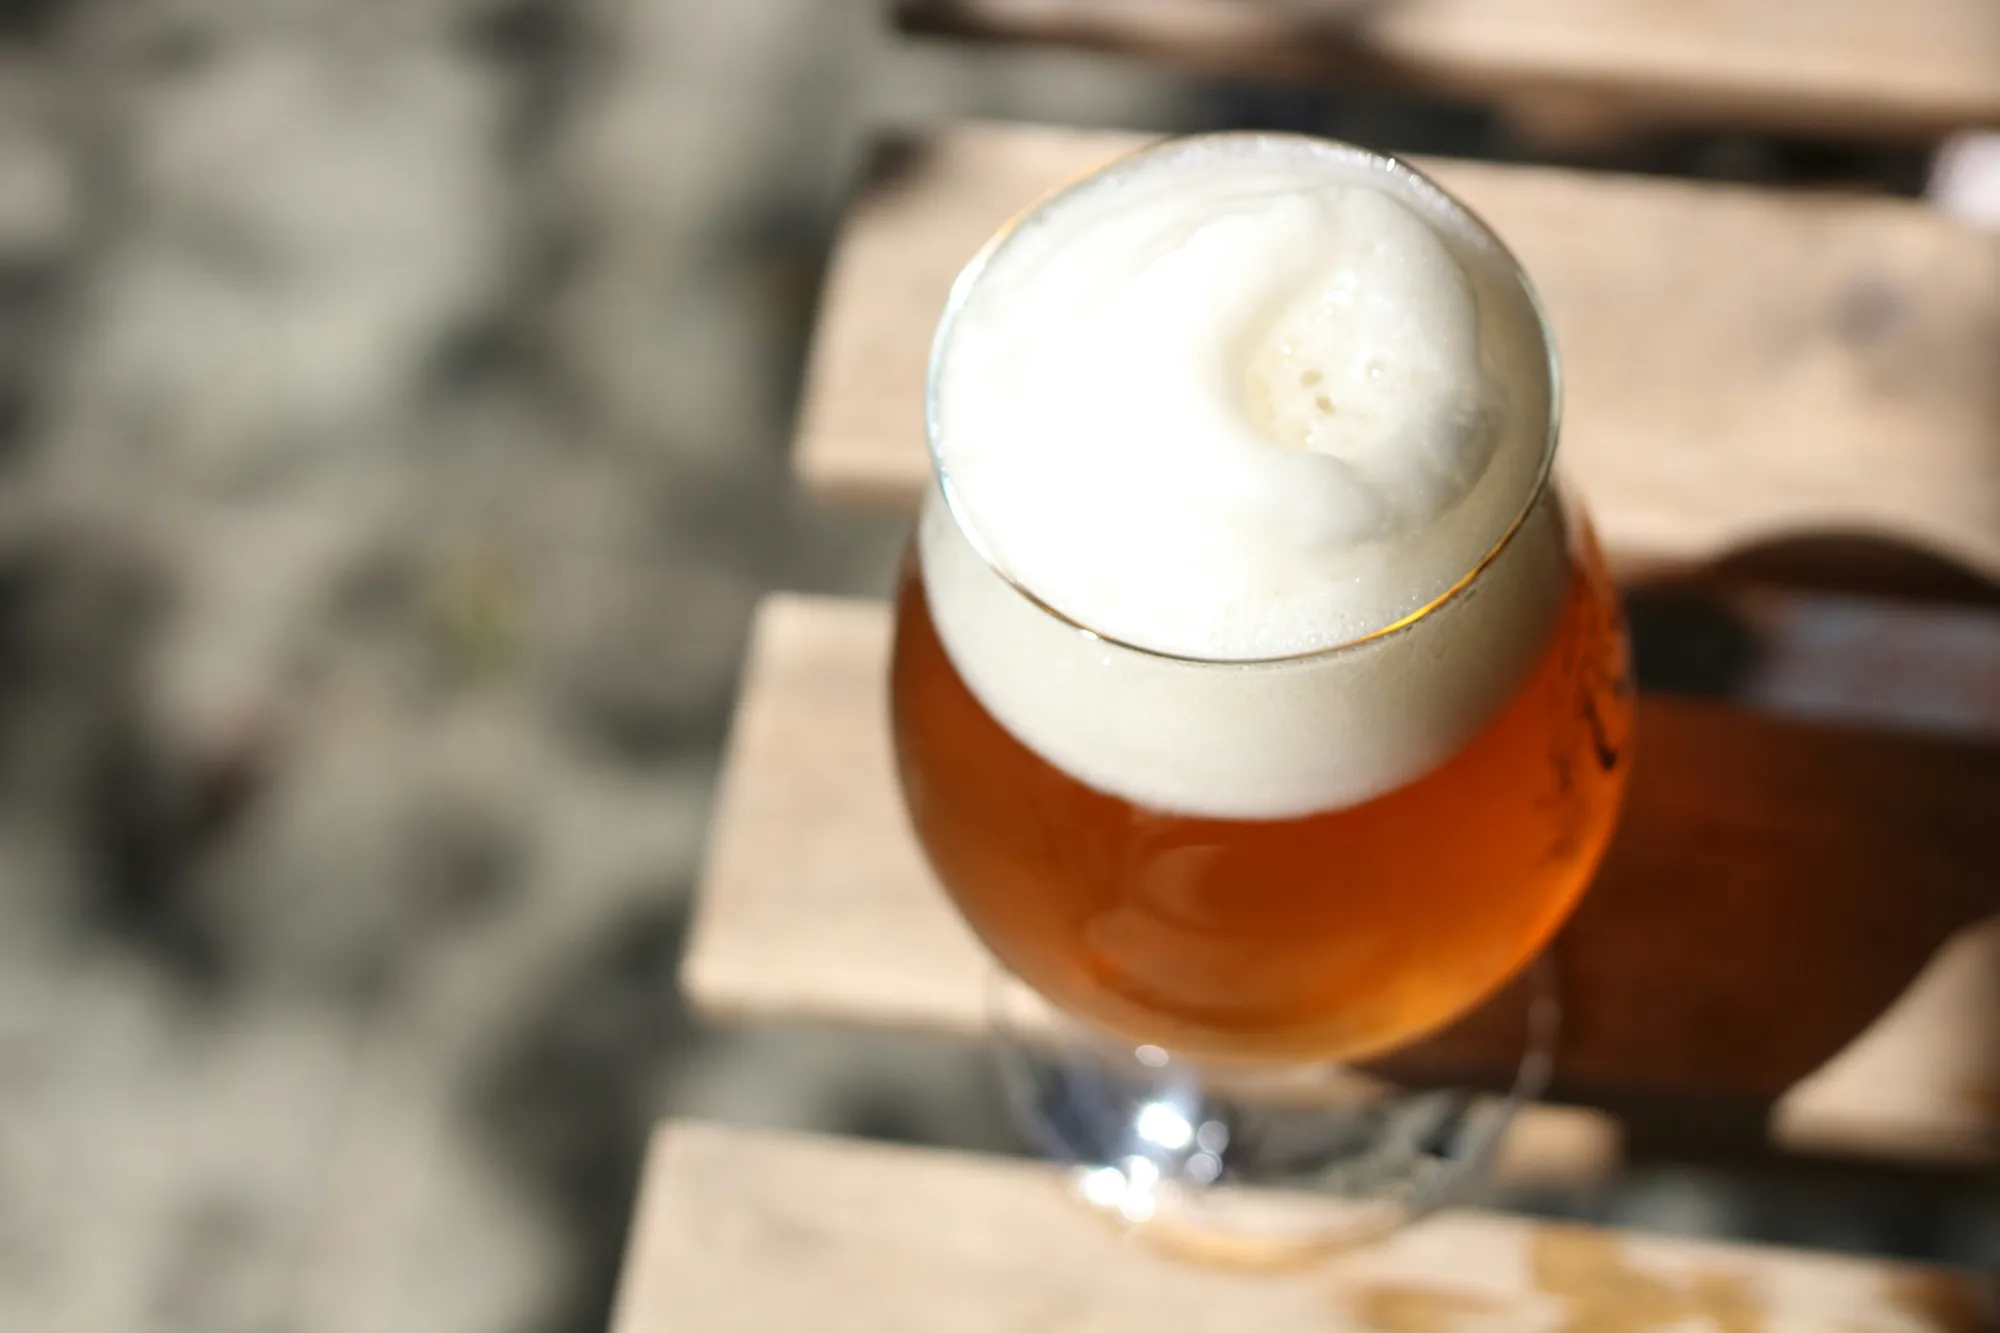 Brewing an IPA – Tips for crafting the perfect india pale ale